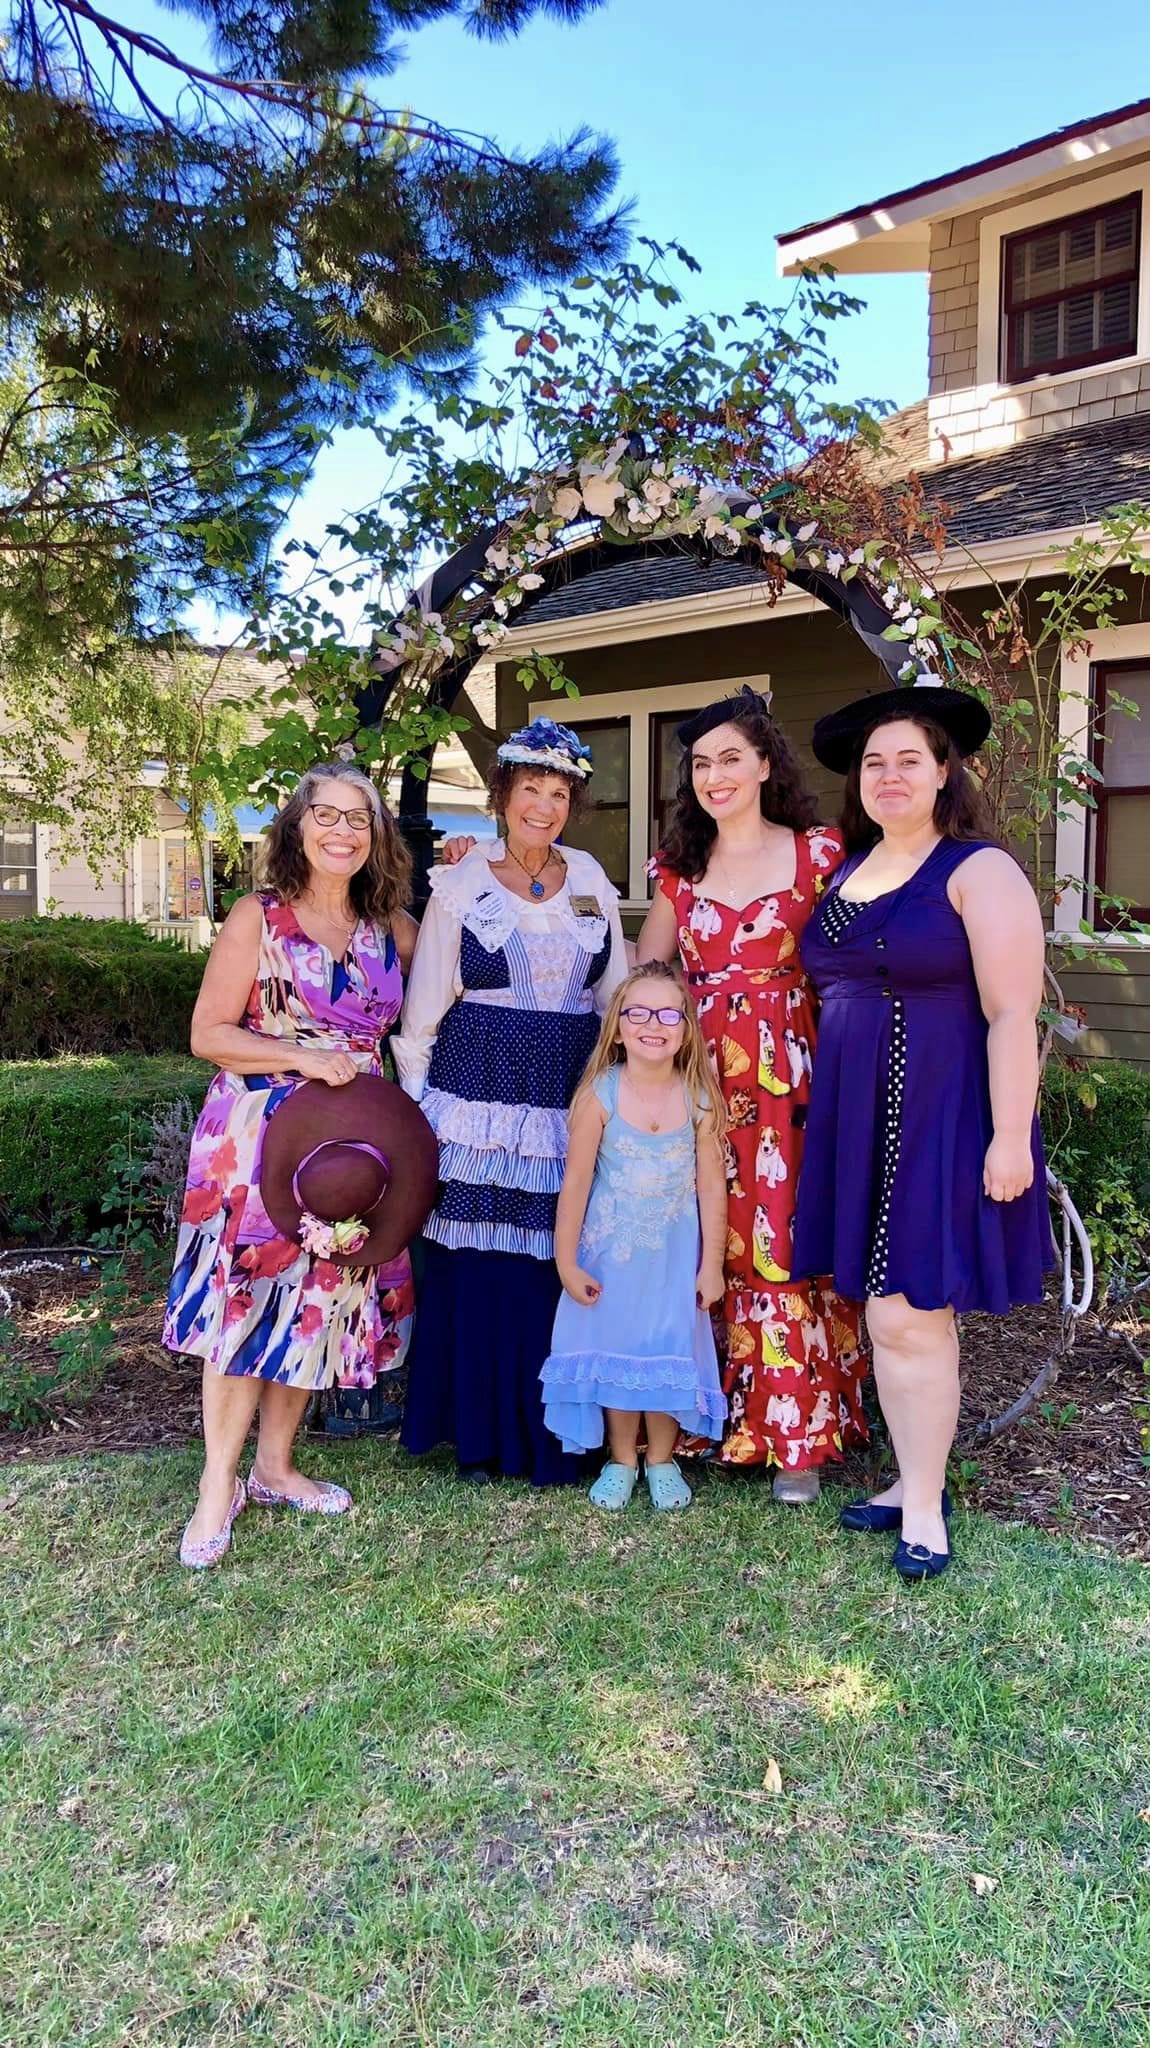 Five women in colorful dresses and one young girl posing in front of a quaint garden arch at Heritage Square, Oxnard, on a sunny day.